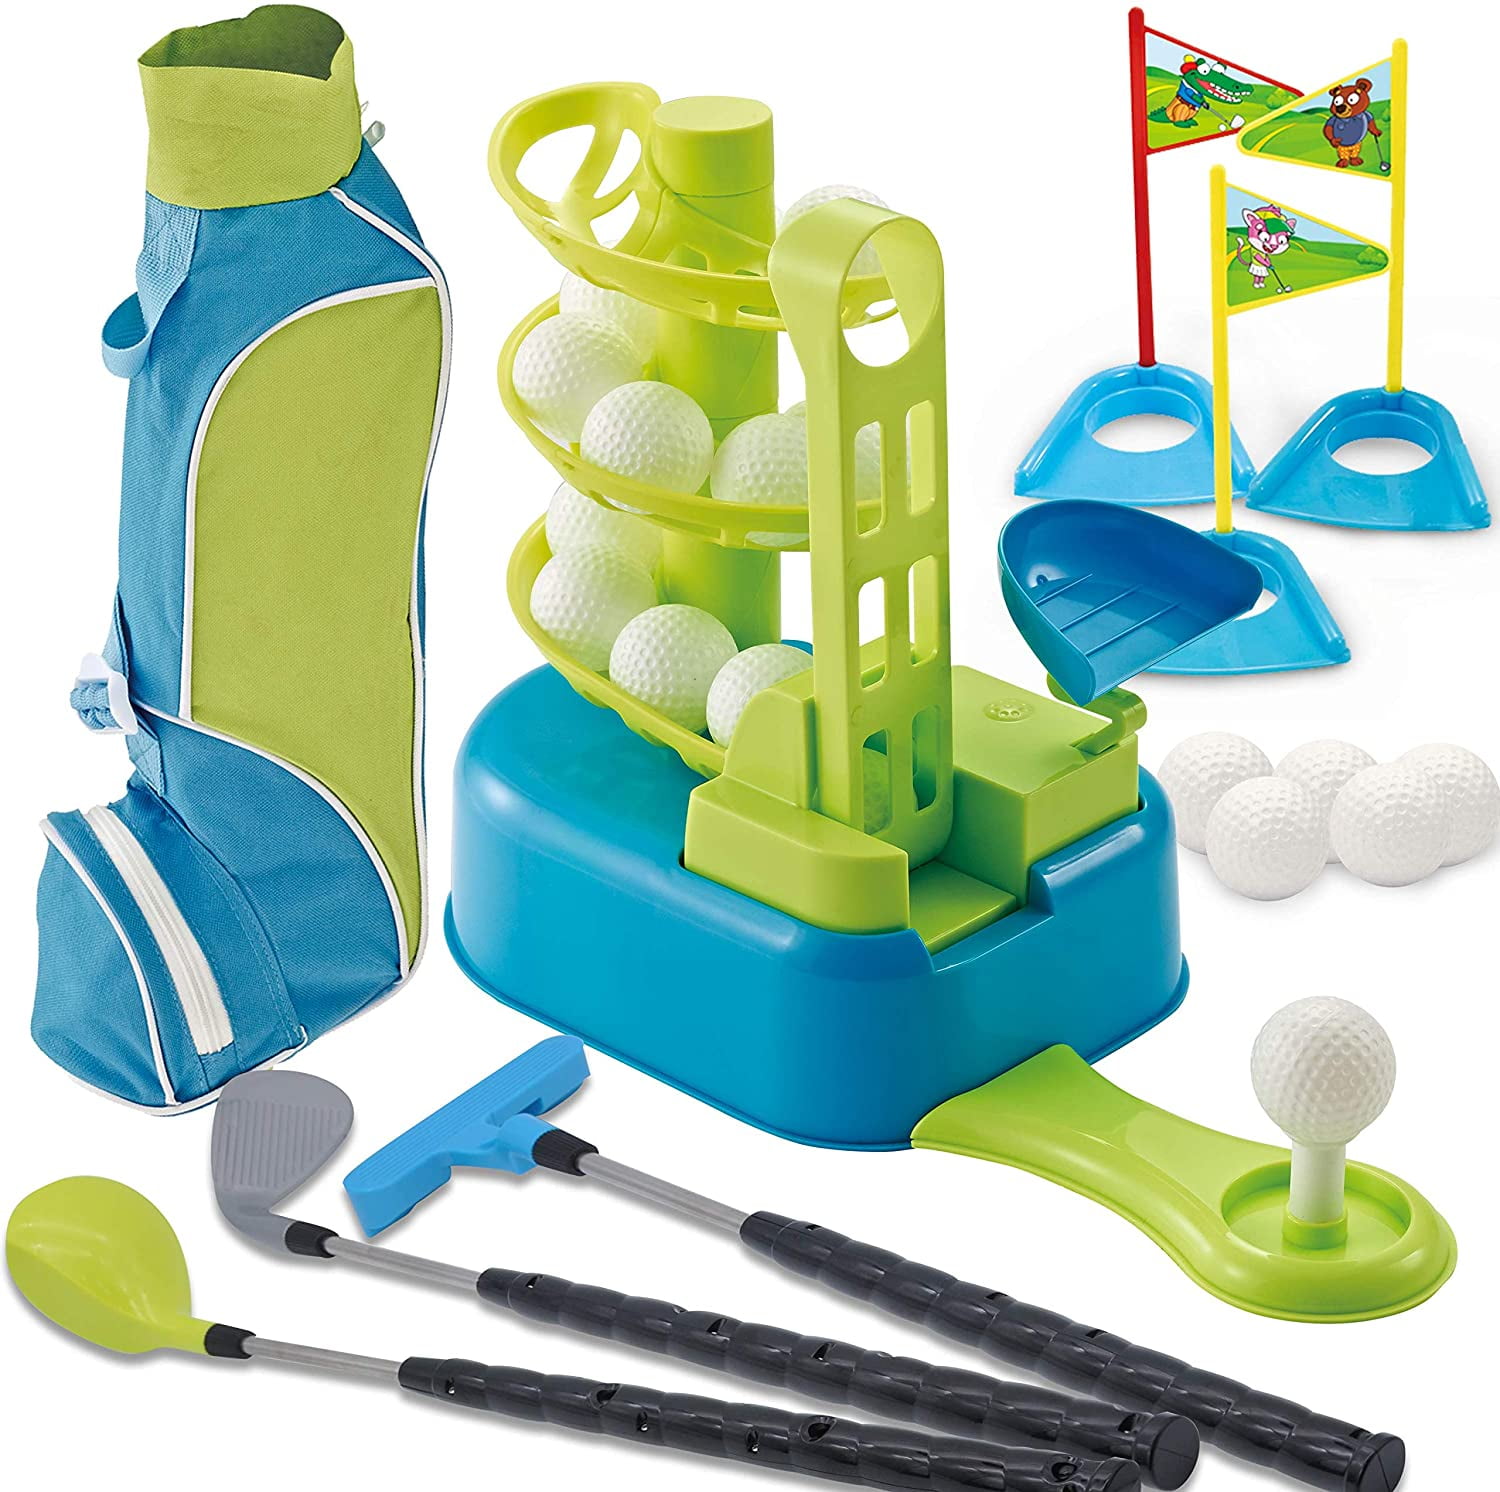 Club Golf Comprehensive Toy Set with 3 Golf Clubs, 3 Club Heads, Deluxe Toy Golf Bag, 15 Training Toy Golf Balls and Accessories, for Toddler Kids Boys and Girls Golf, Outdoor Lawn Sport Toy